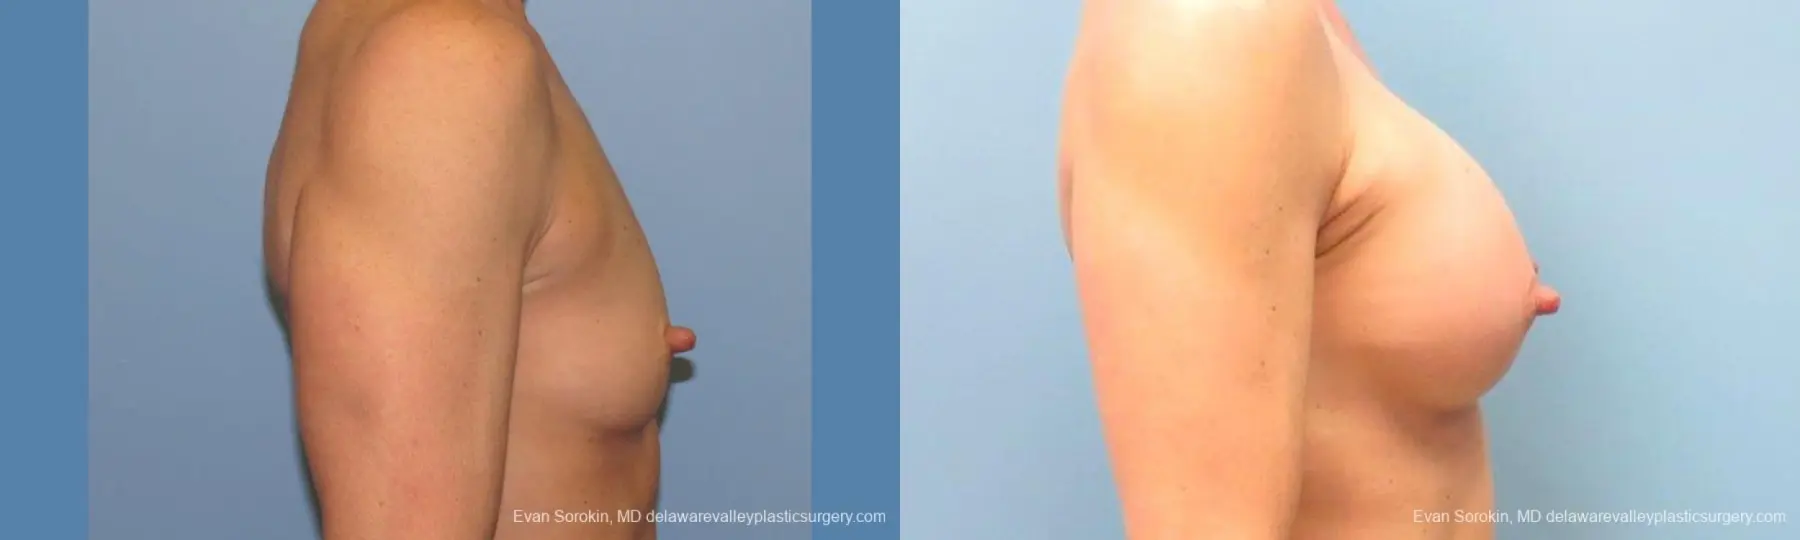 Philadelphia Breast Augmentation 9744 - Before and After 3